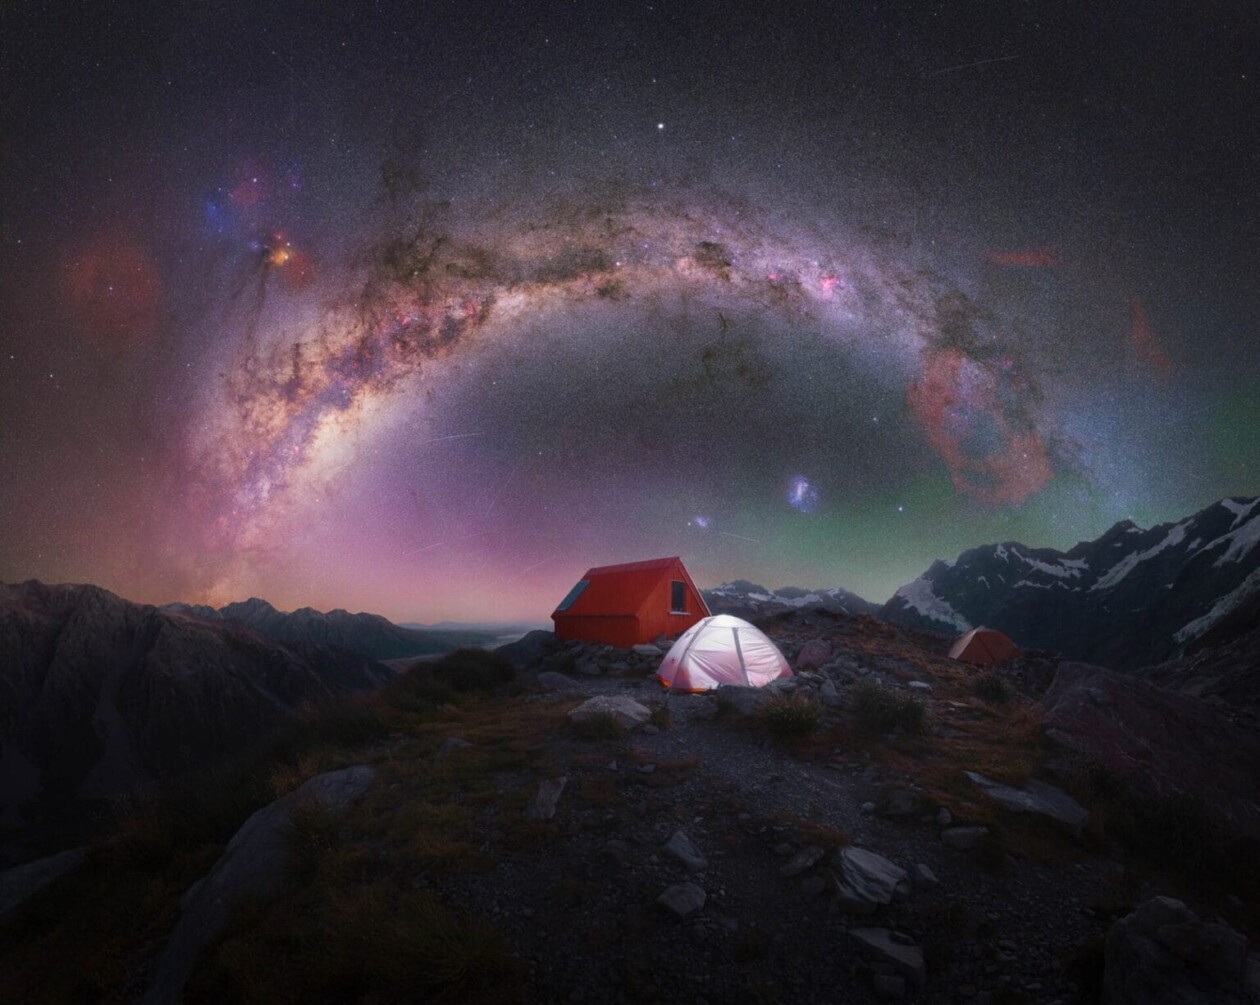 Capturing The Celestial Majesty In The Milky Way Photographer Of The Year Contest (4)